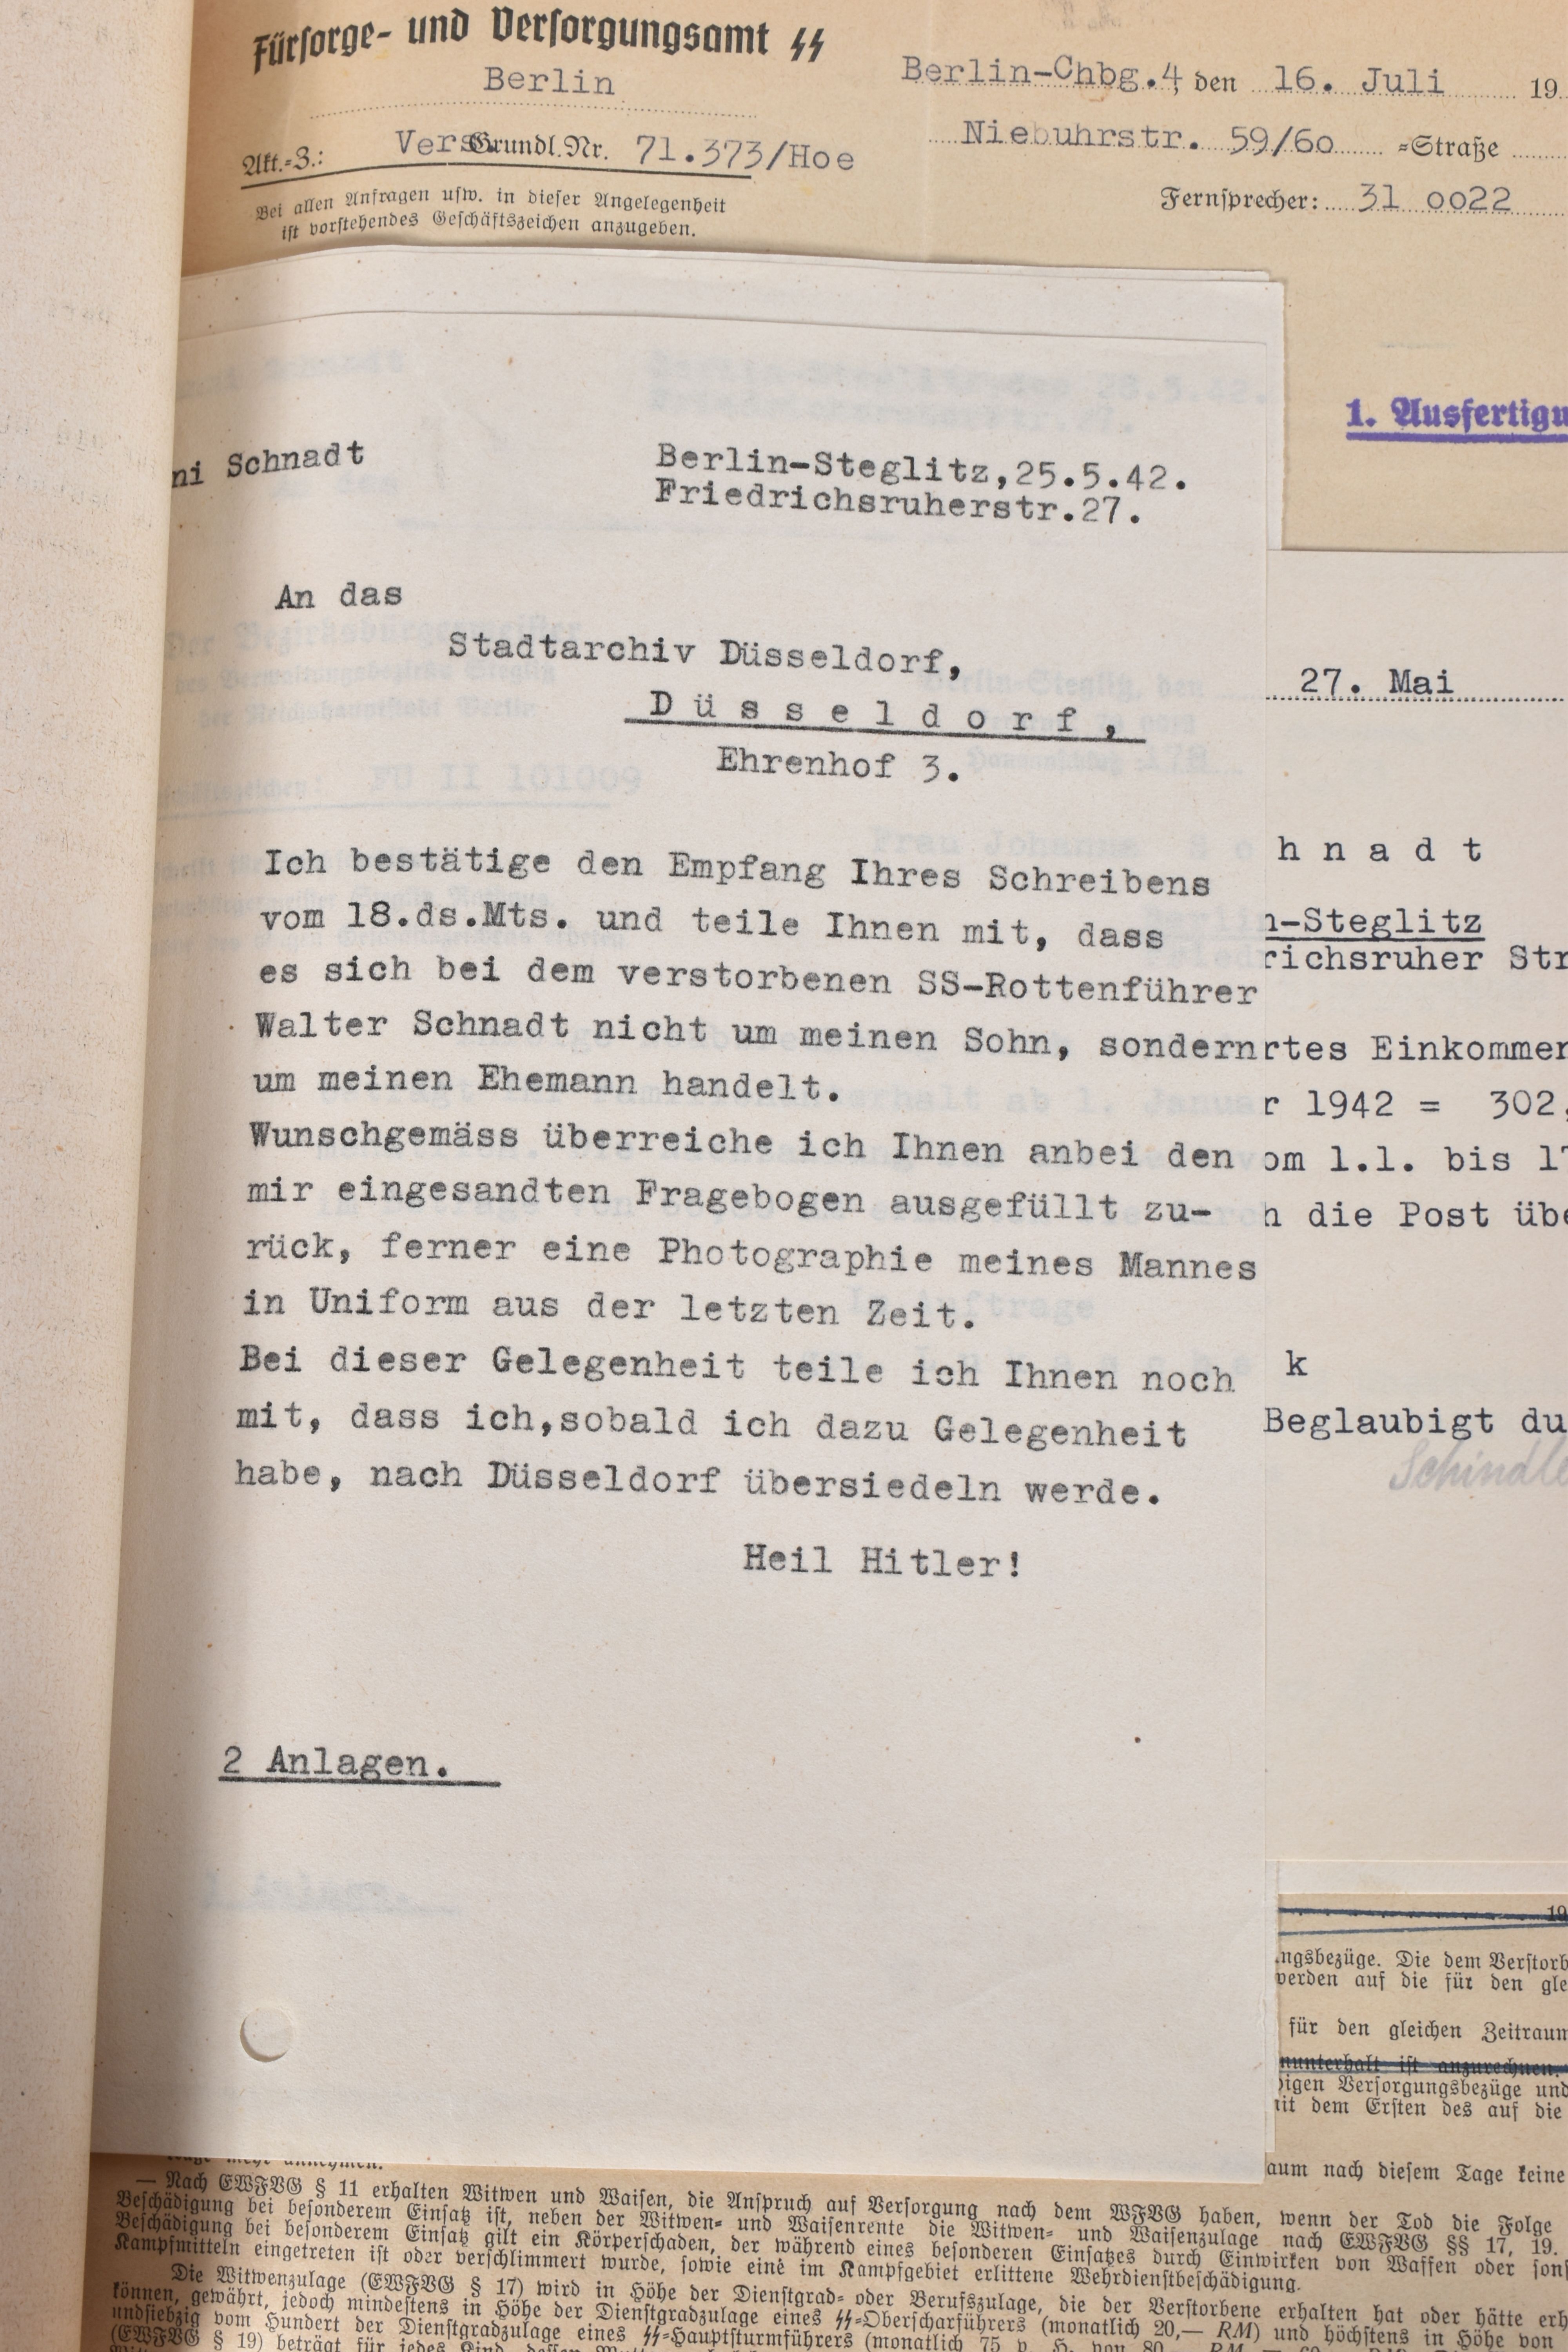 A LARGE COLLECTION OF DOCUMENTS FOR WALTER SCHNADT, to include documents, photo, and a card, he - Image 37 of 46